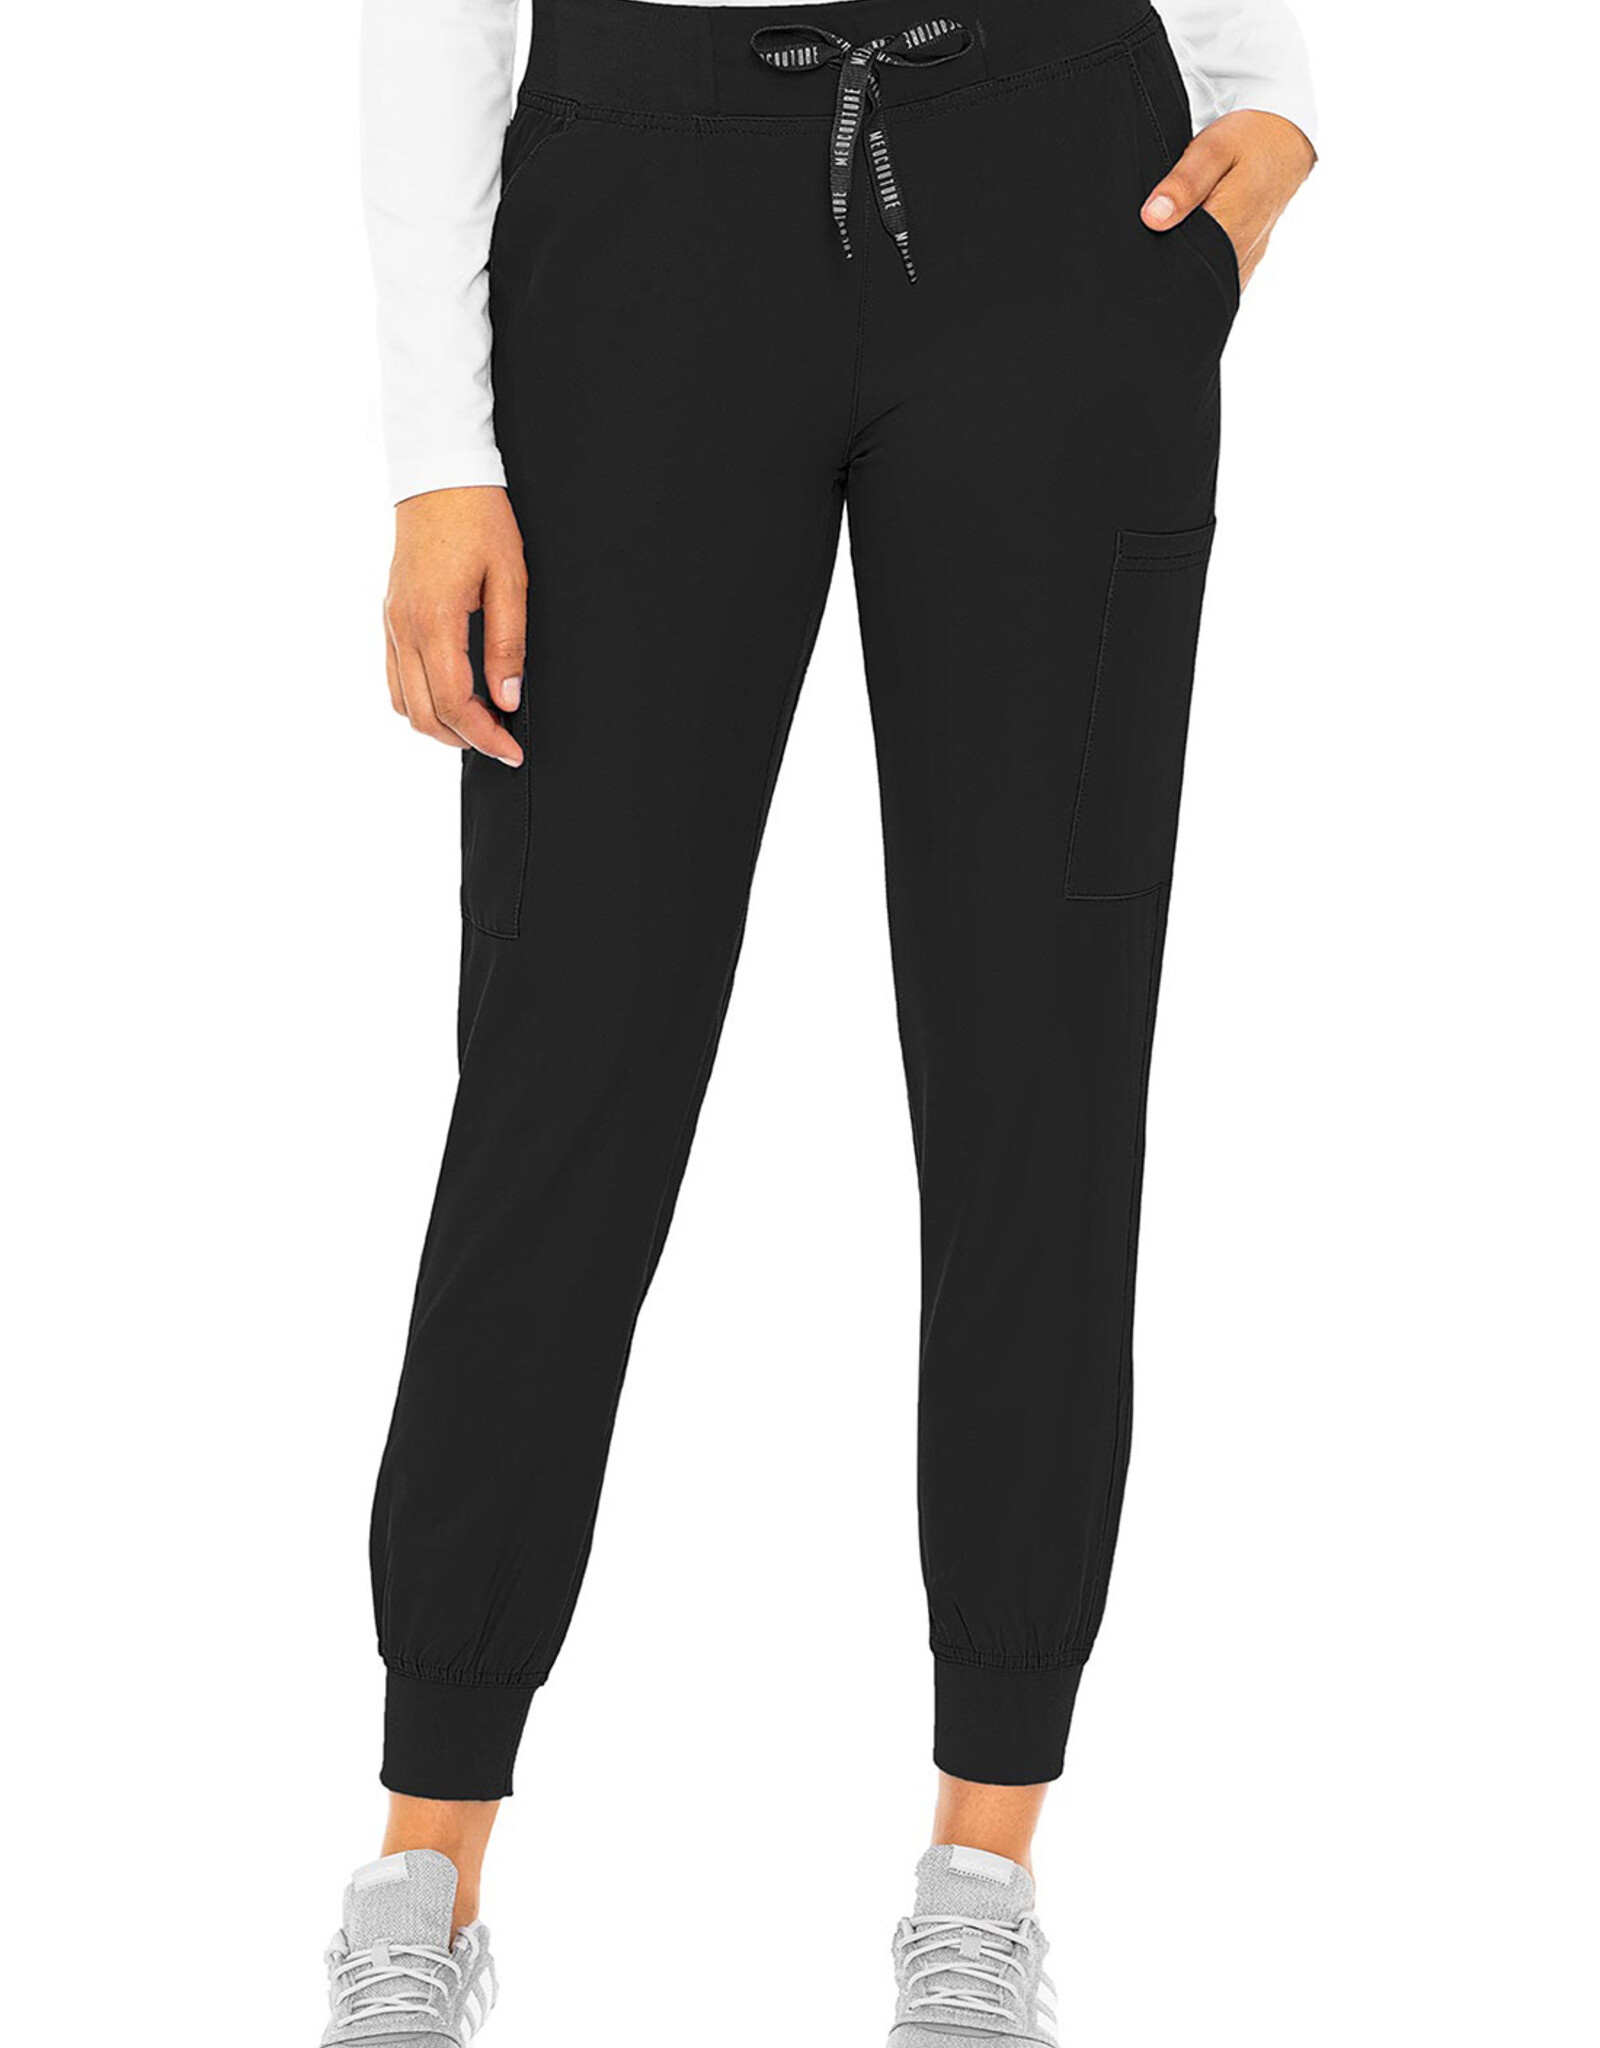 Med Couture Insight Women's Jogger Pant (Regular)